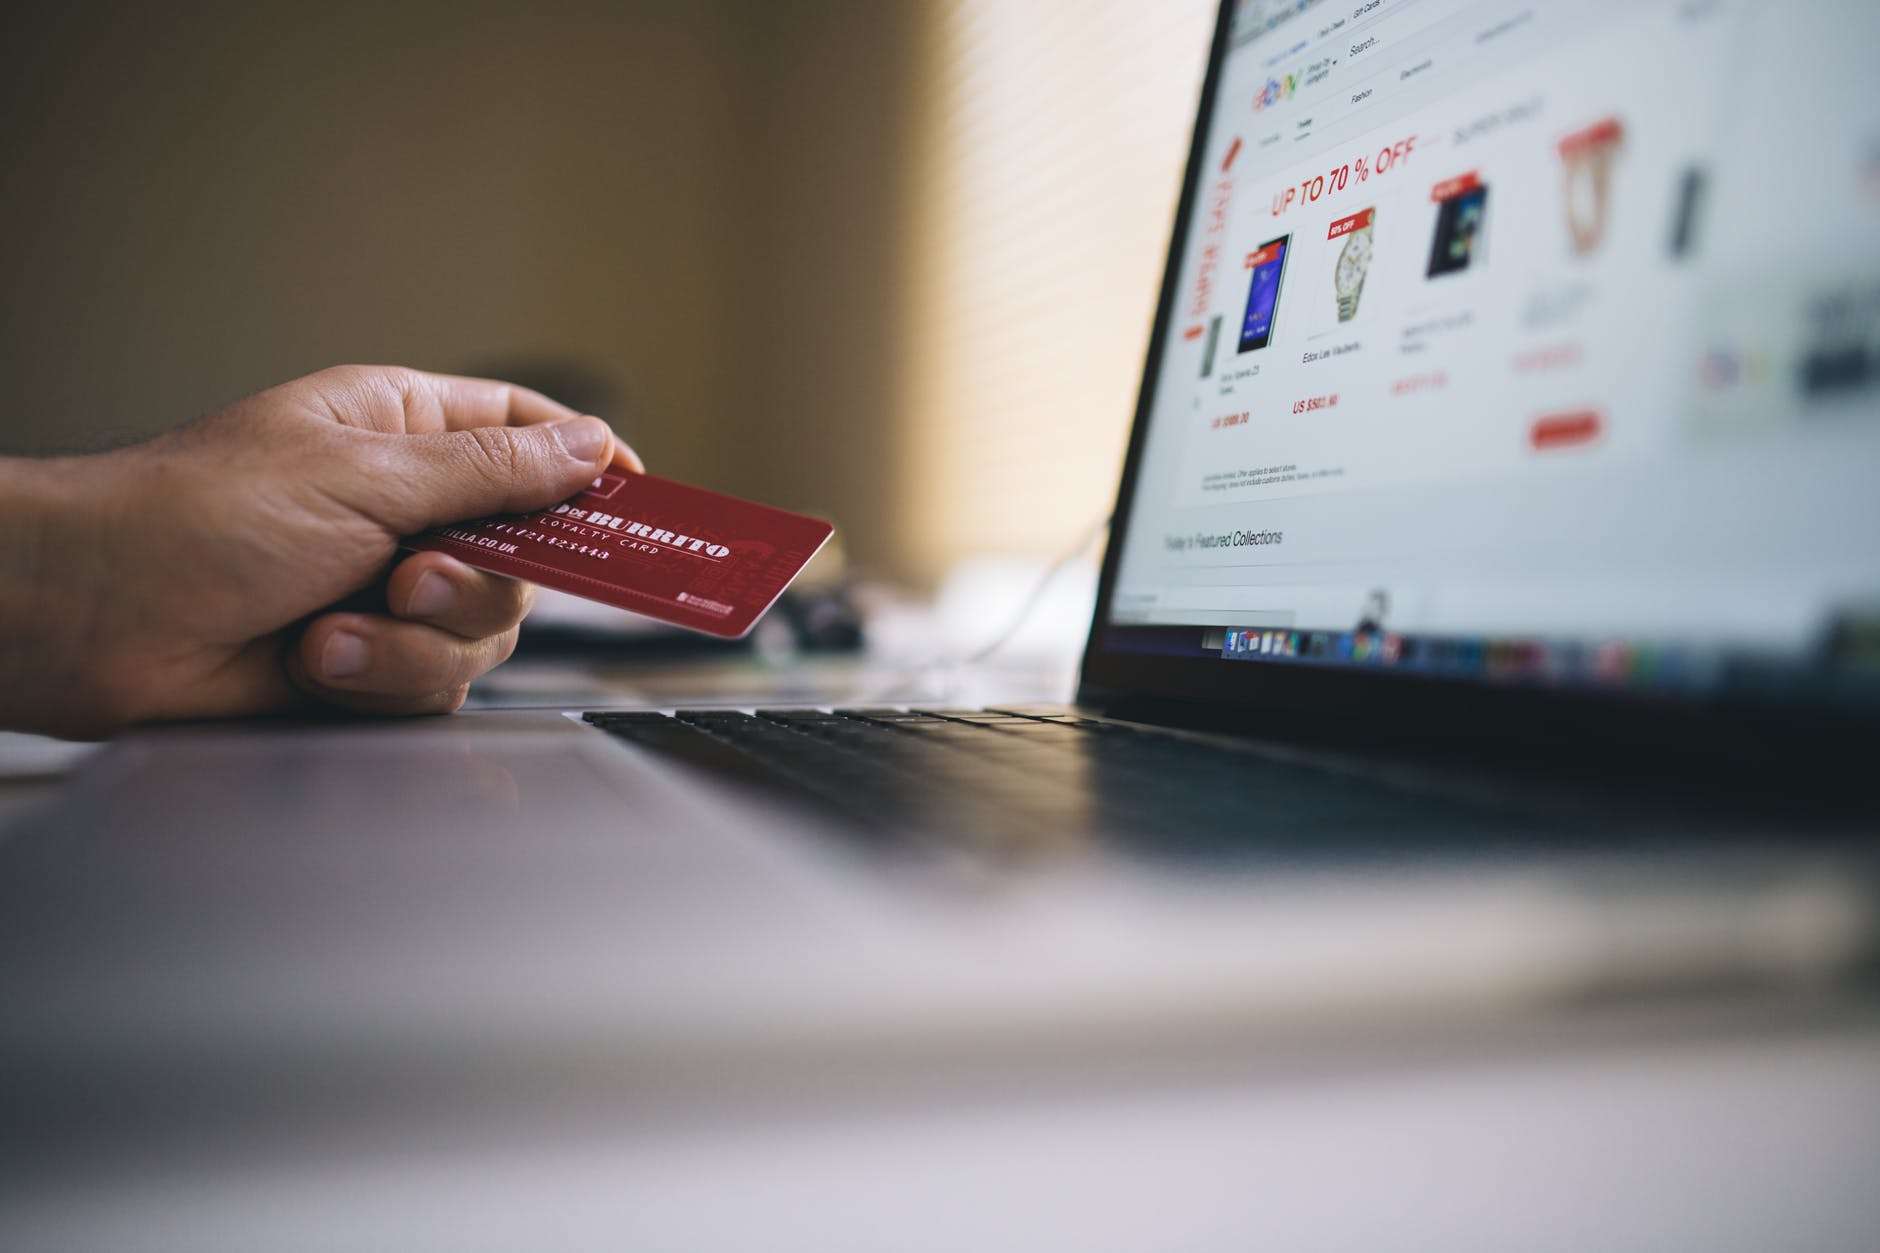 What are Six Effective Tips to Make Your eCommerce Business Thrive?